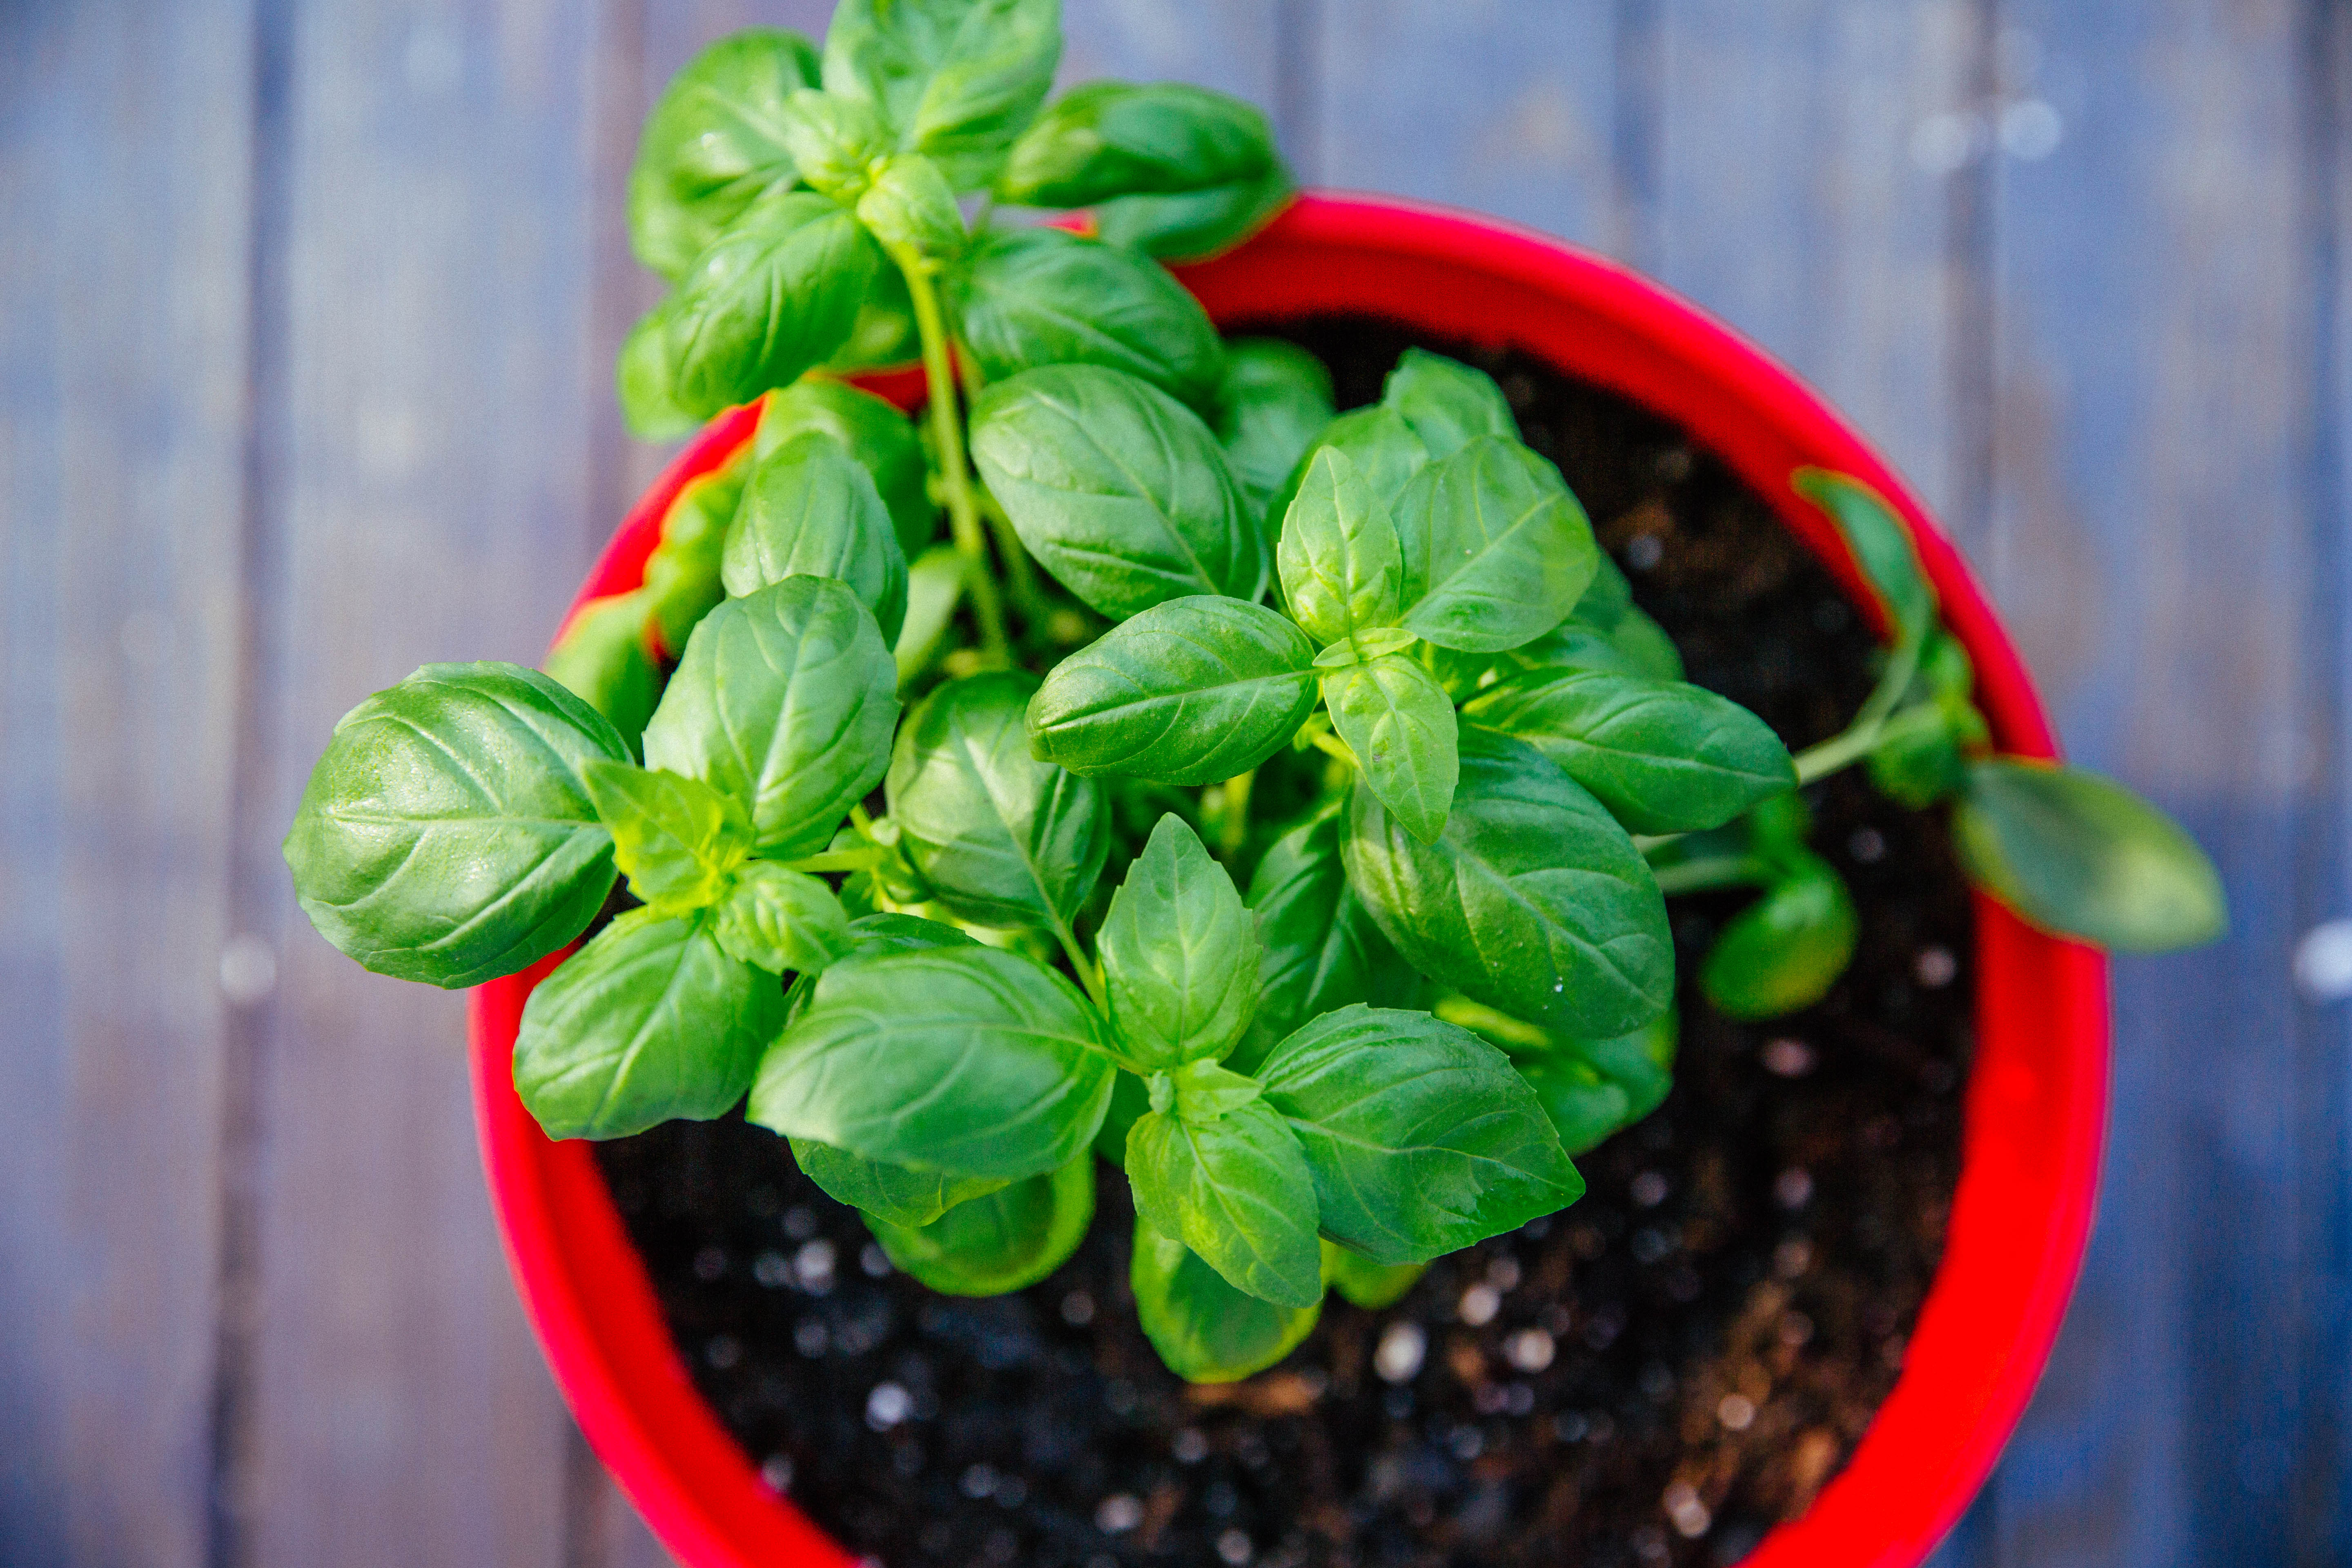 Spring is almost here: How to grow and use herbs in south Louisiana